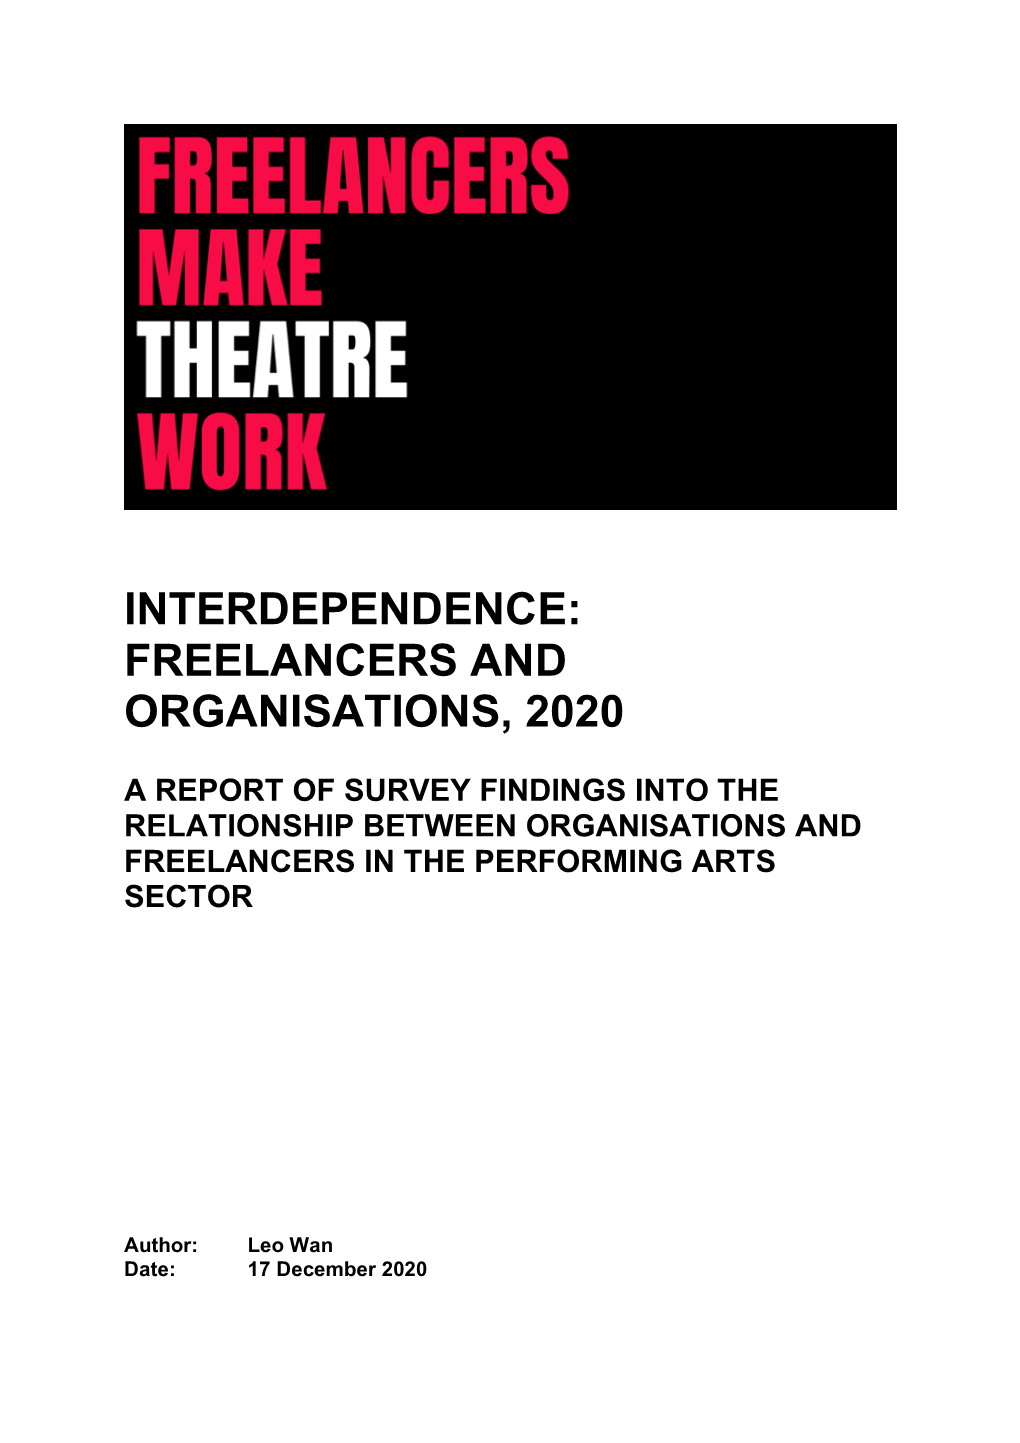 Interdependence: Freelancers and Organisations, 2020